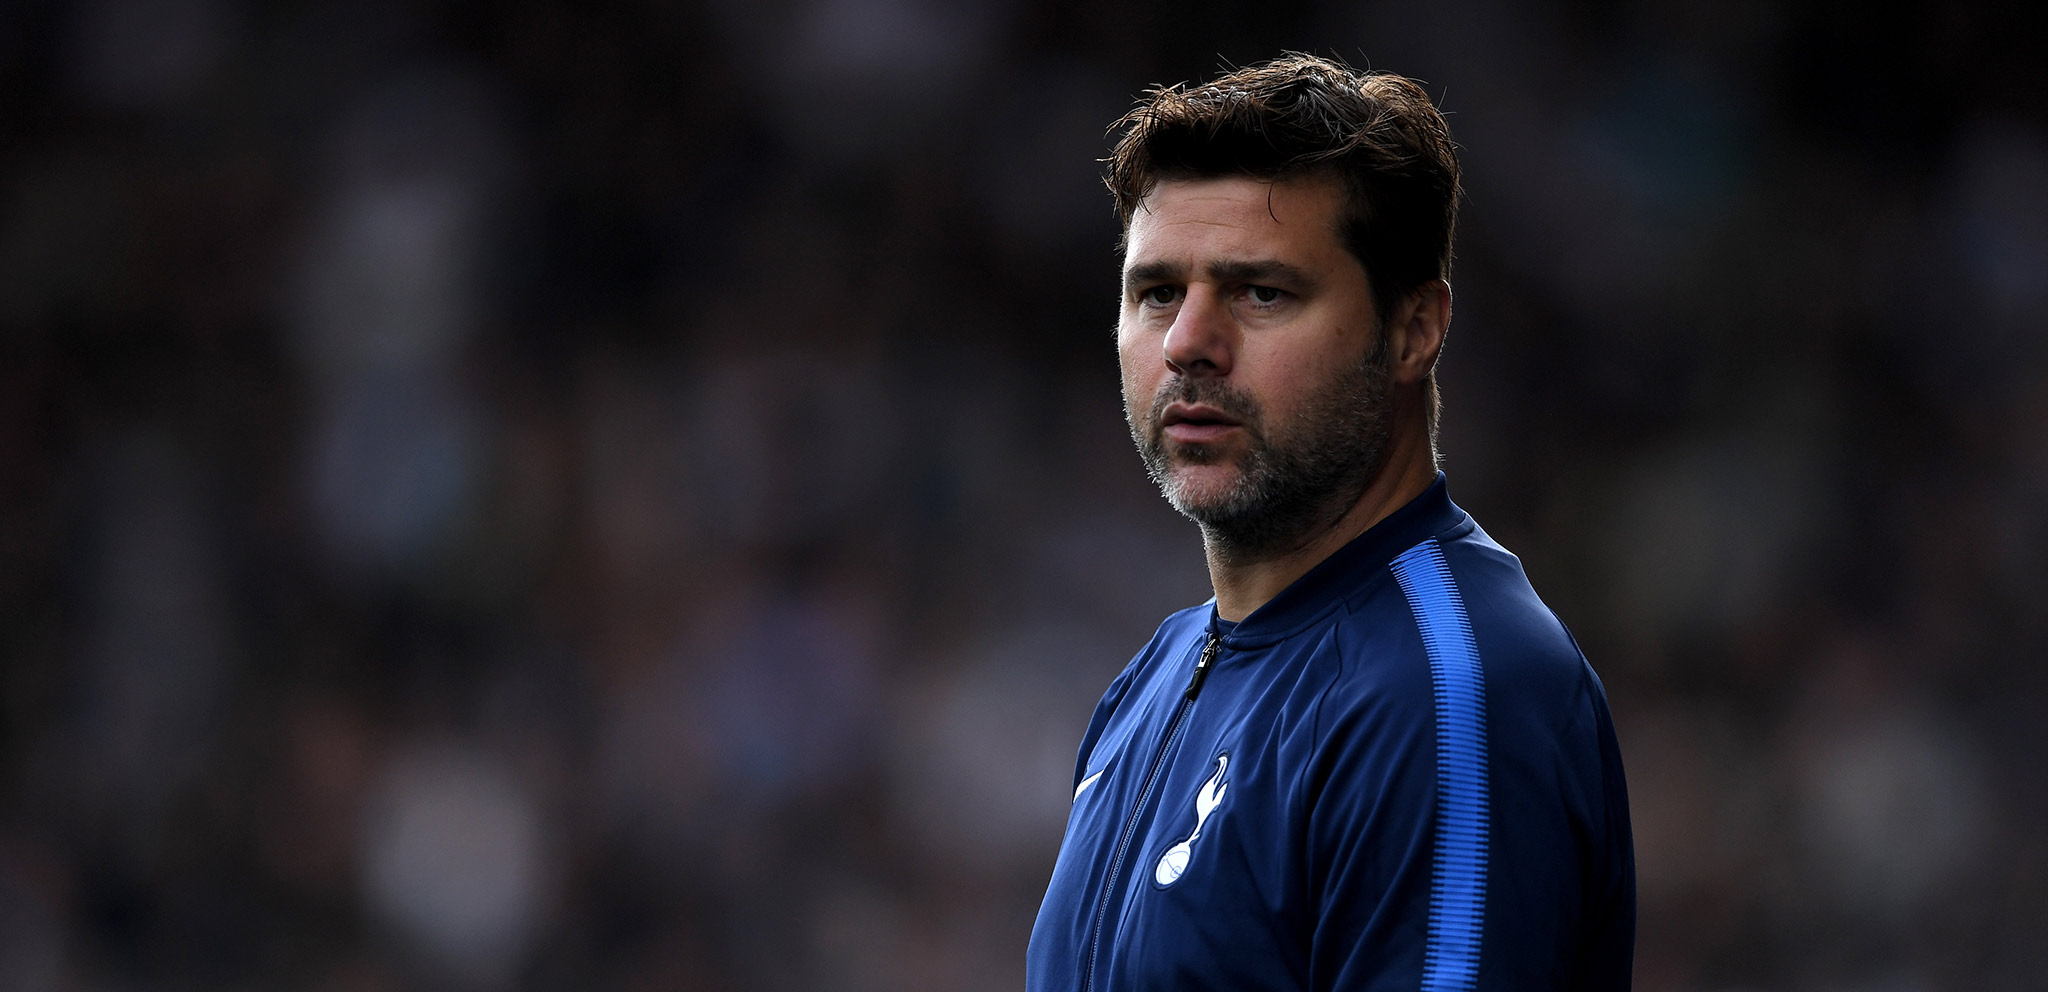 Mauricio Pochettino suggests he could walk away from Tottenham if club wins 'miracle' Champions League - Bóng Đá